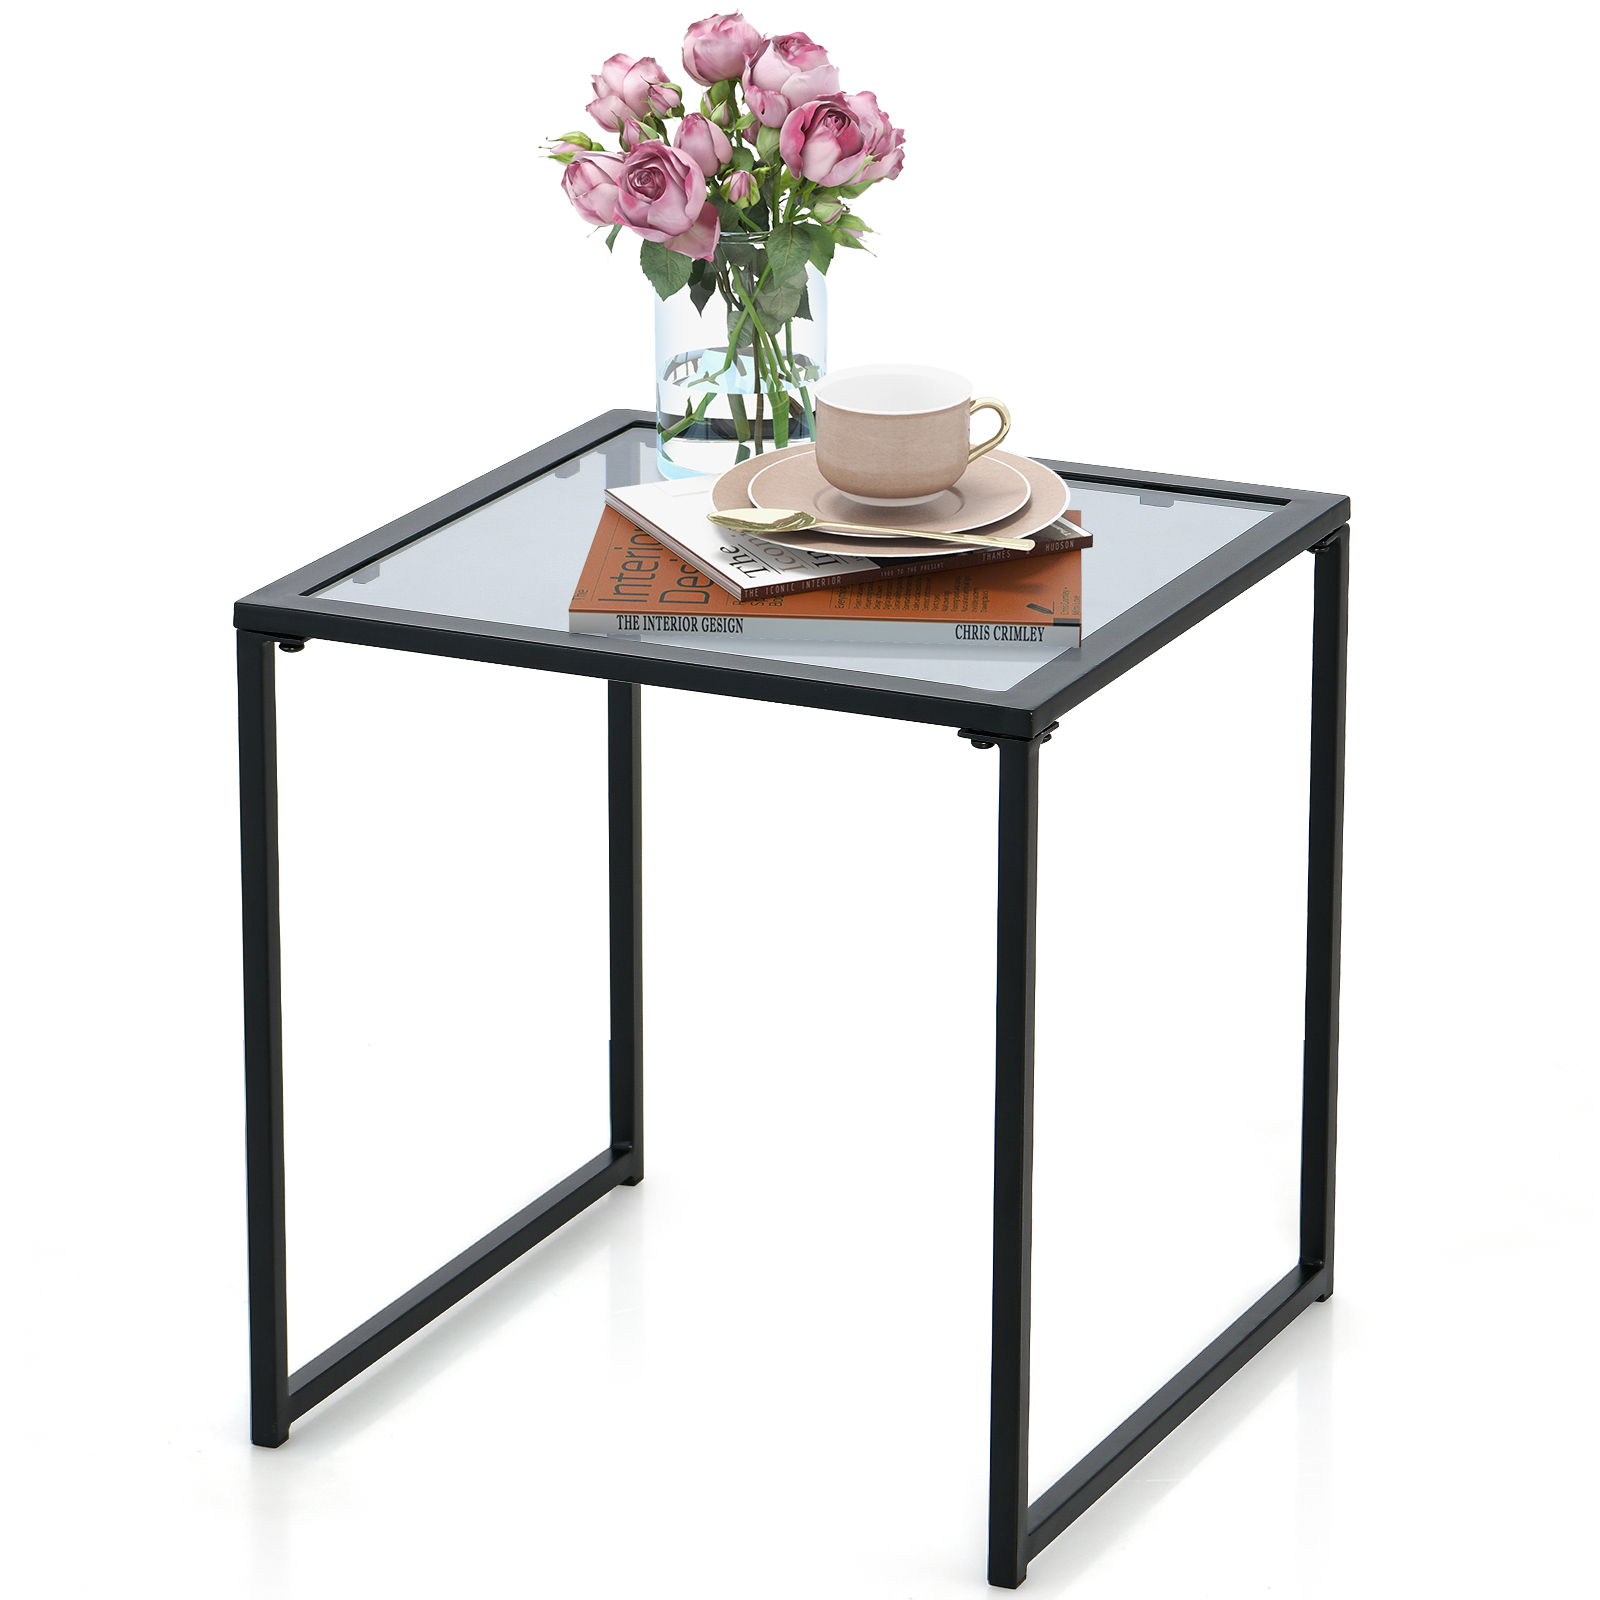 43cm_Tempered_Glass_Top_Side_Table_with_Metal_Frame-9.jpg